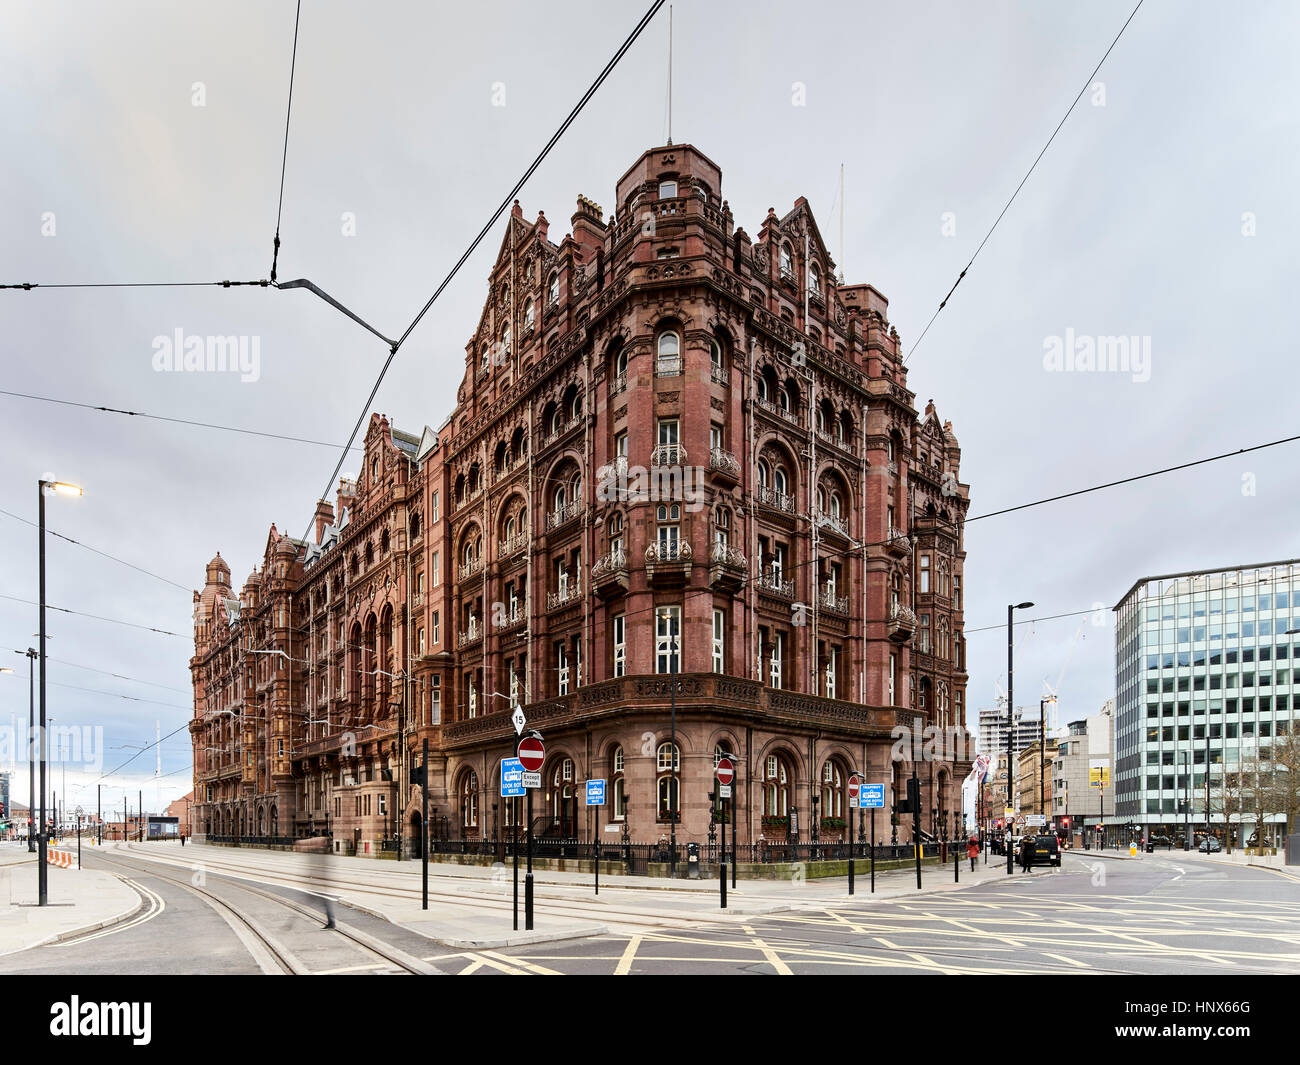 Cityscape with red brick hotel on corner site, Manchester, UK Stock Photo